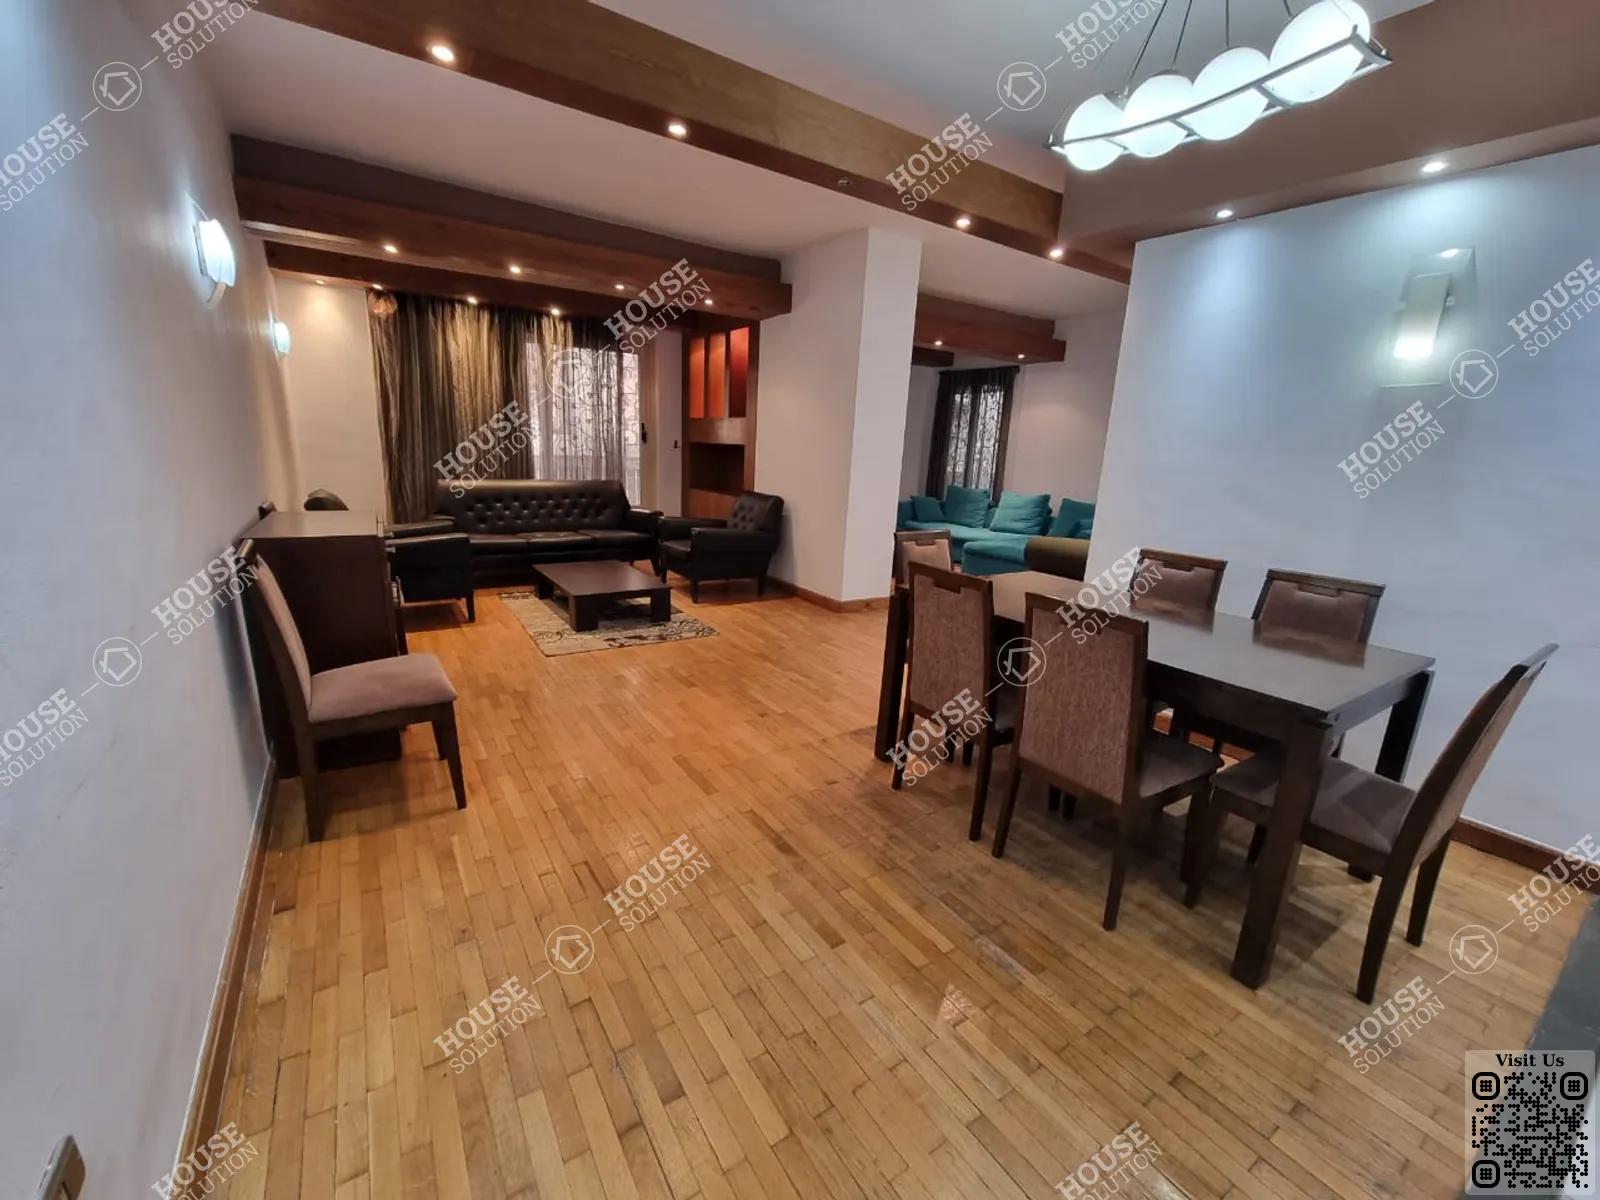 RECEPTION  @ Apartments For Rent In Maadi Maadi Sarayat Area: 150 m² consists of 3 Bedrooms 2 Bathrooms Modern furnished 5 stars #2543-0